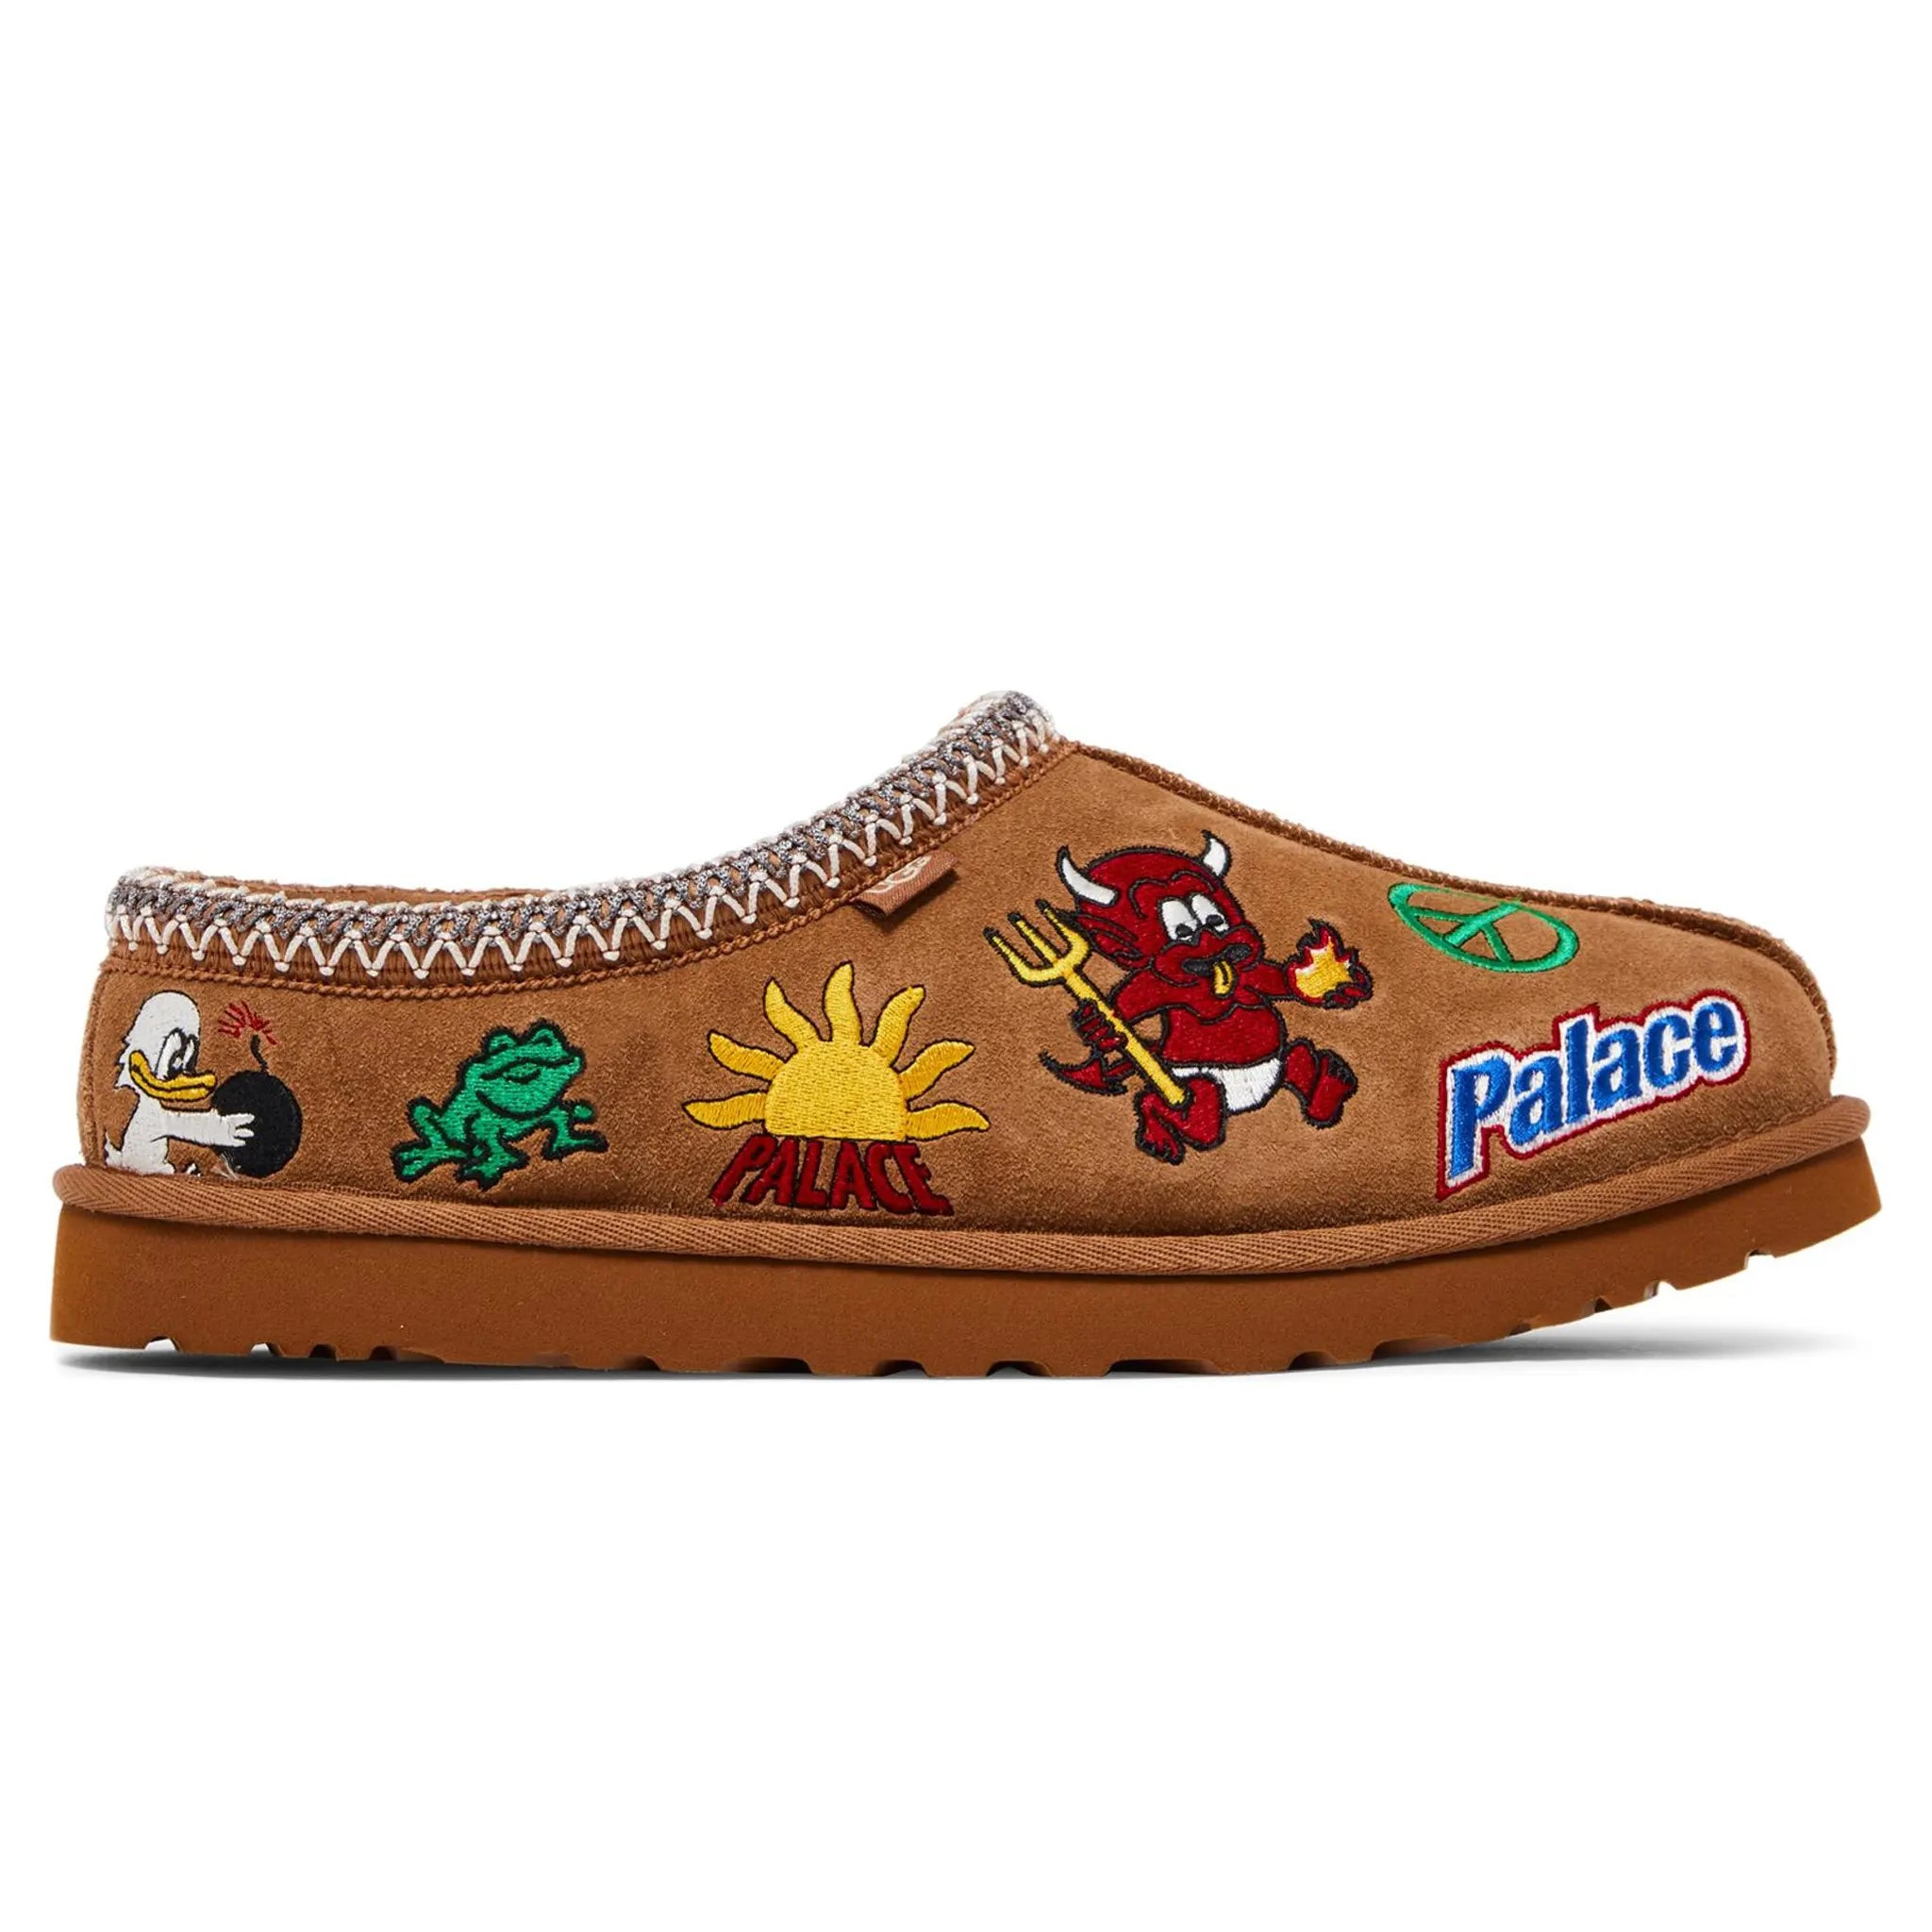 Side view of Palace x UGG Tasman Chestnut Slippers 1157290-CHE